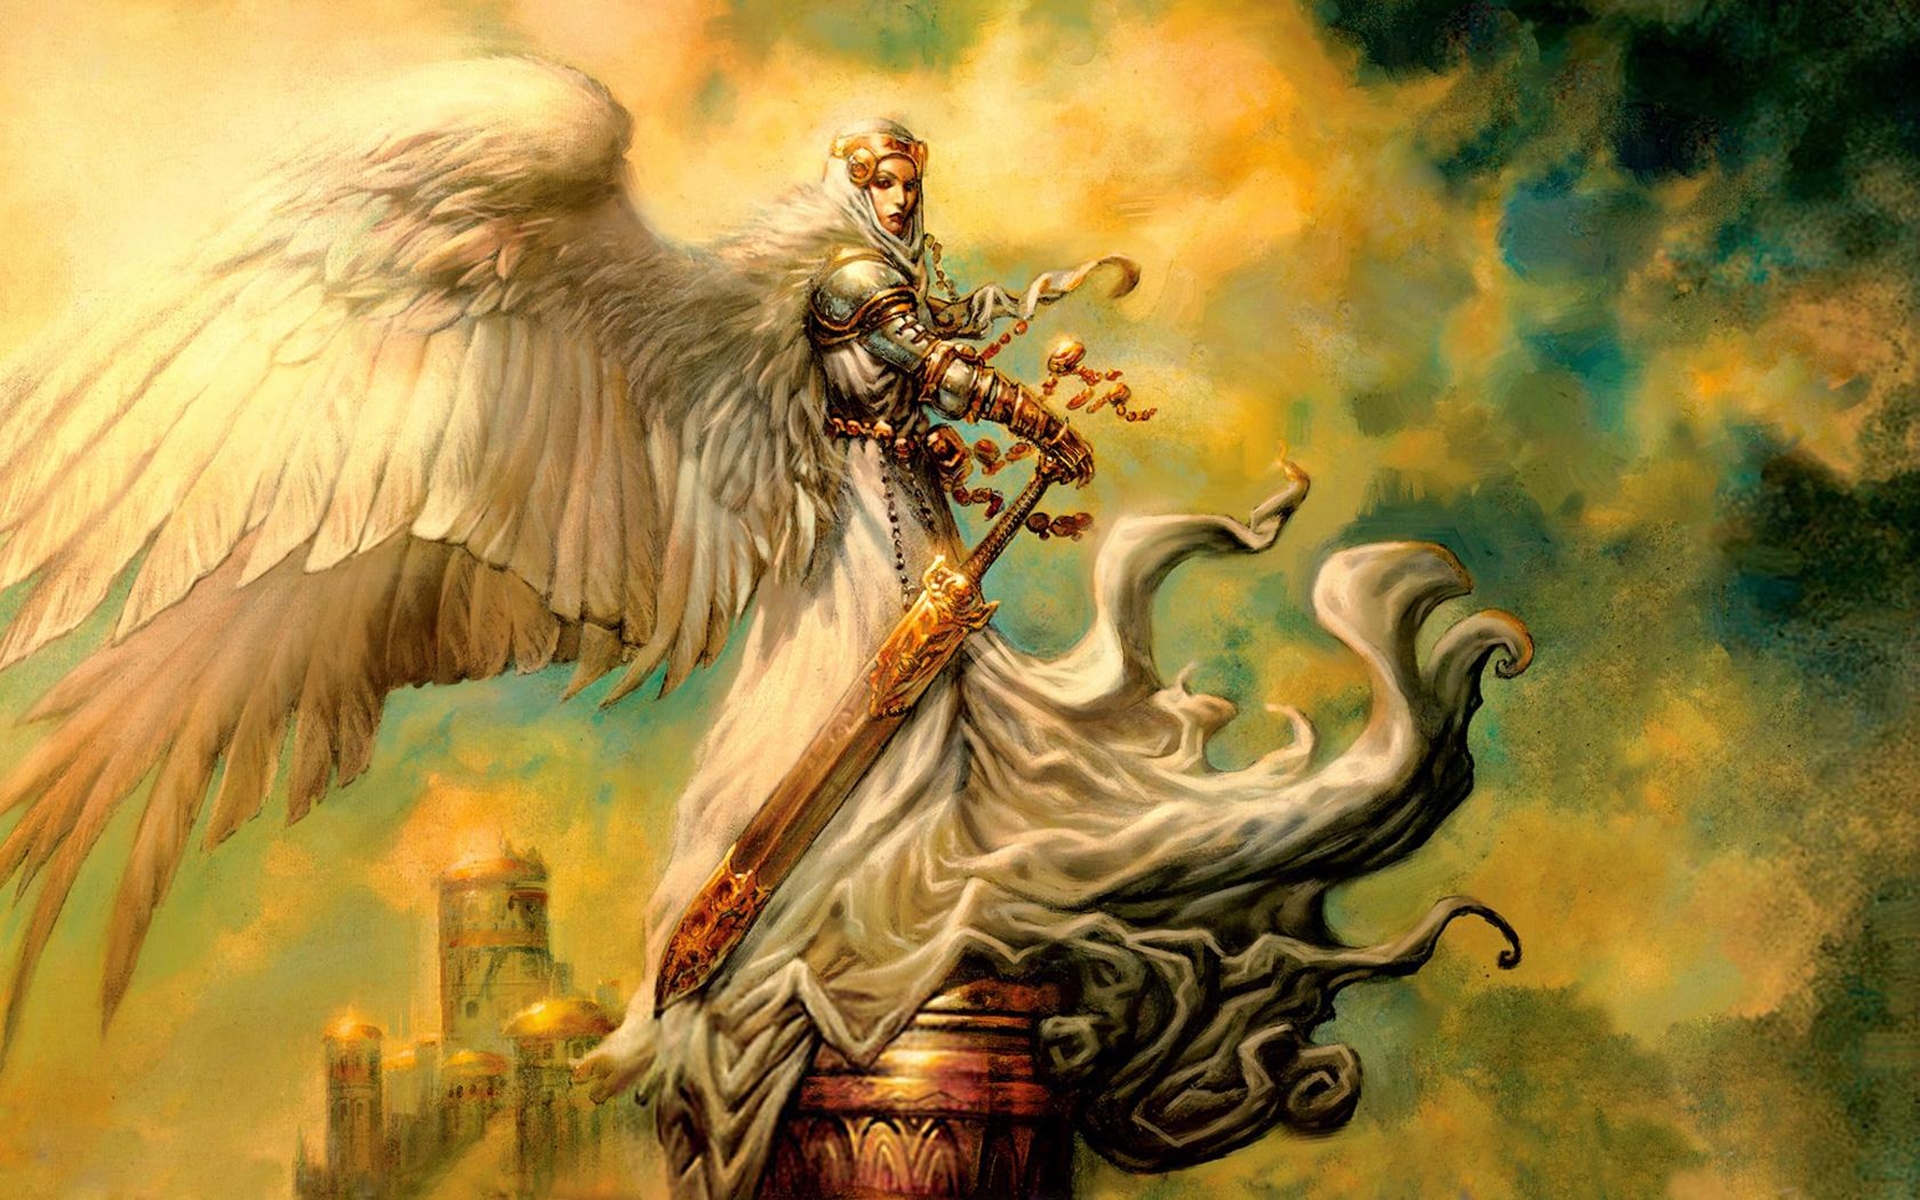 wallpapers game, magic: the gathering, angel, angel warrior, fantasy, wings, woman warrior